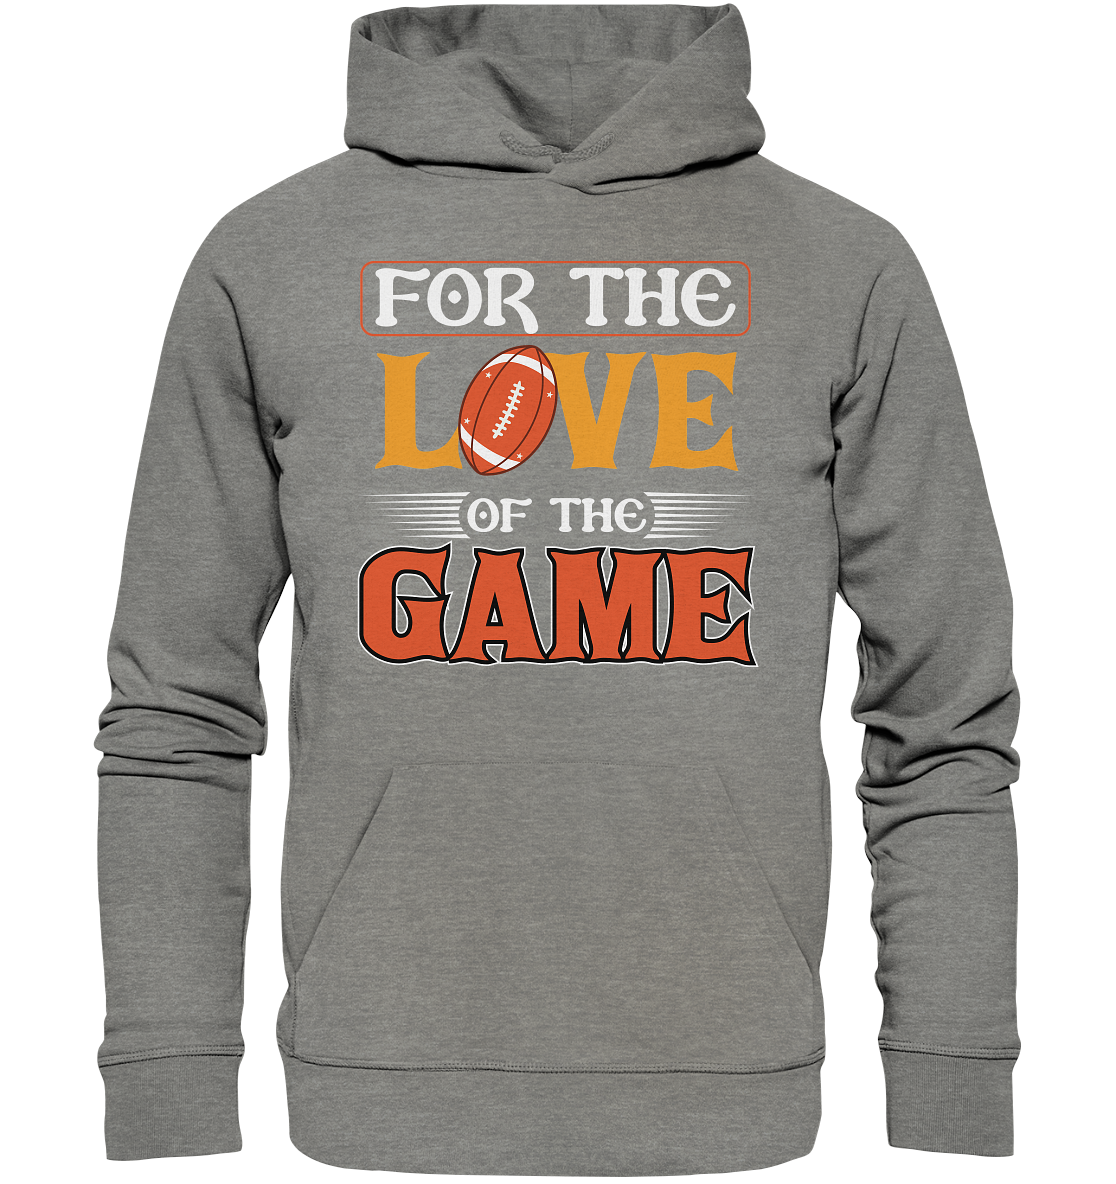 For the Love of the Game - Organic Hoodie - Football Unity Football Unity